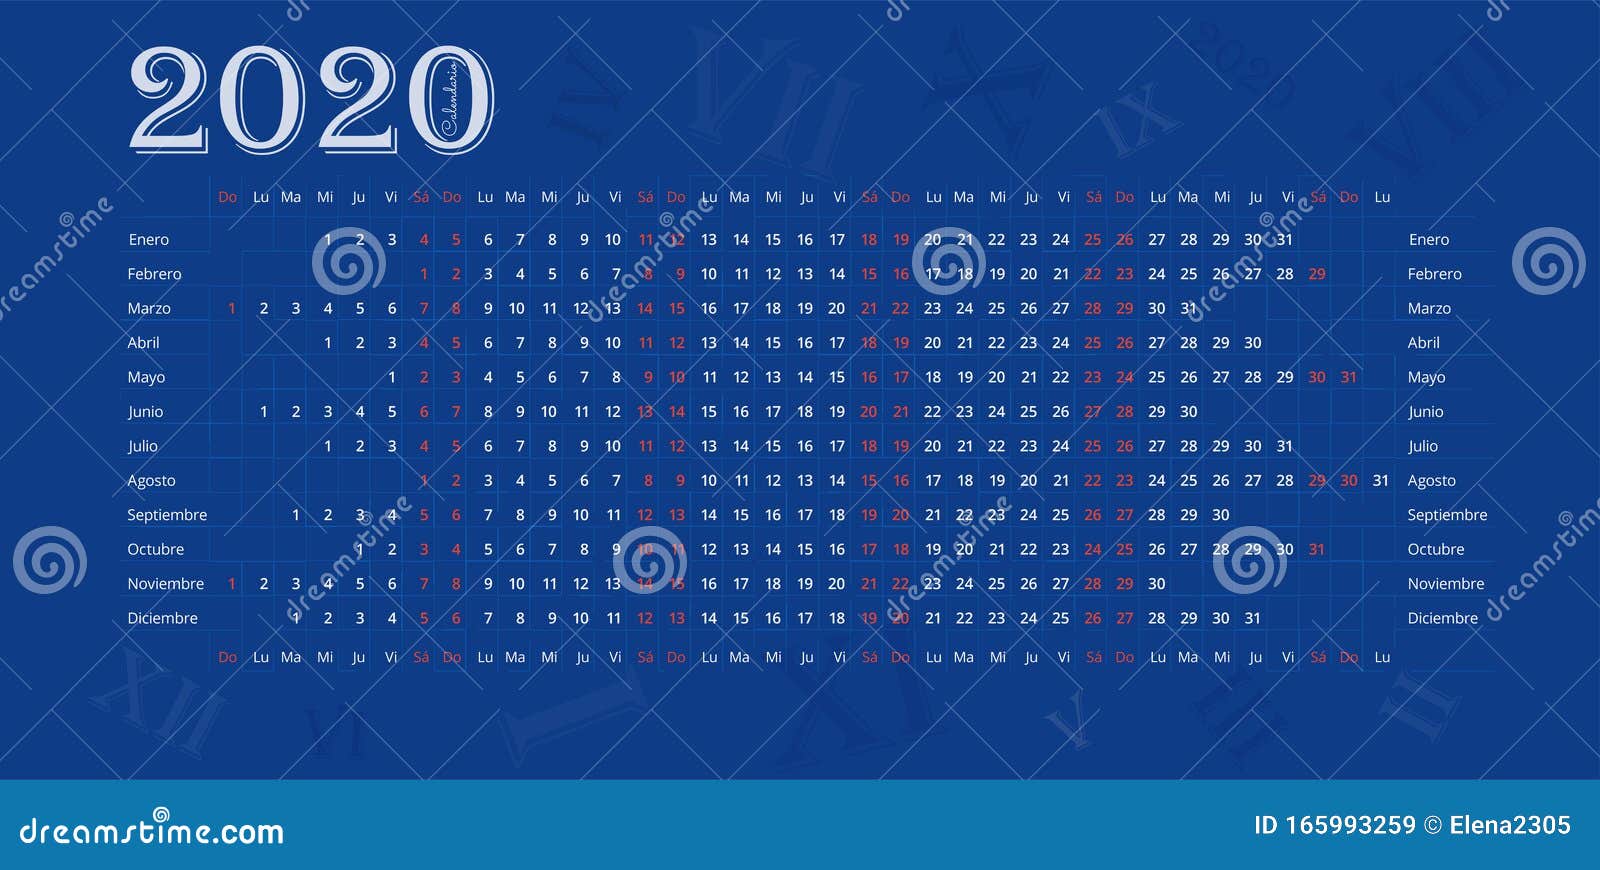 2020 Wall Calendar In Spanish On Deep Blue Background With Roman